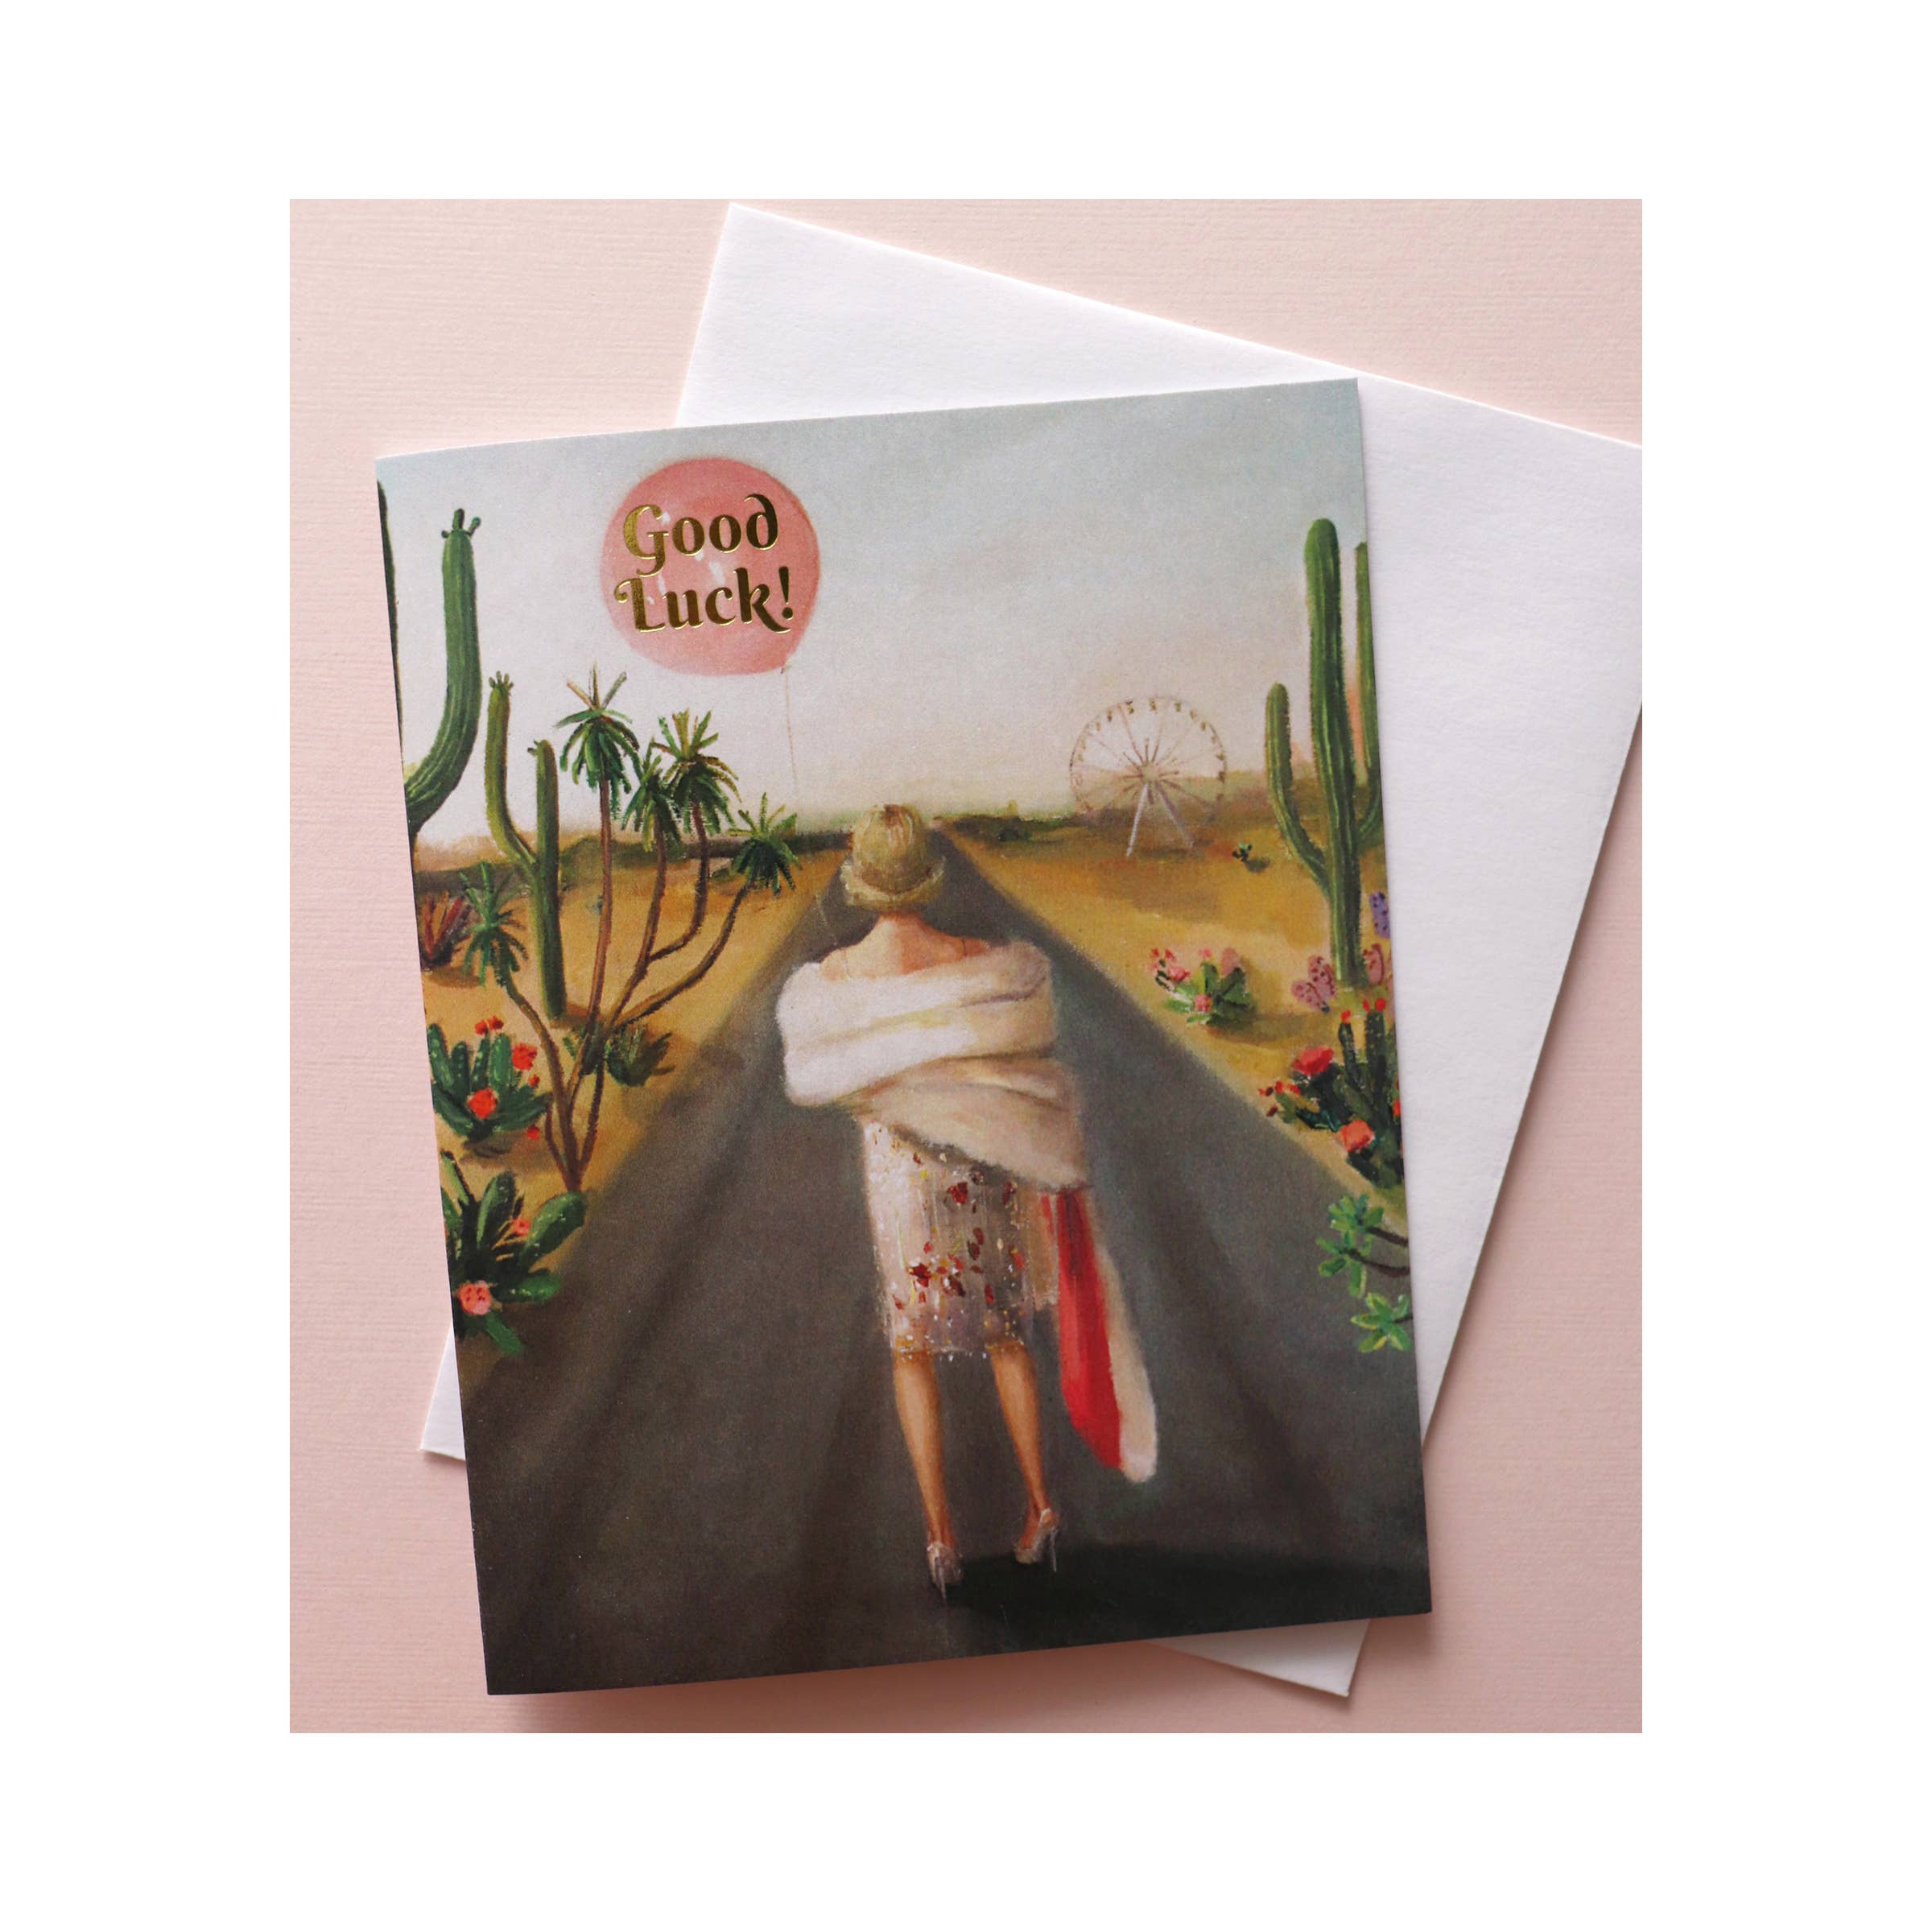 Greeting card with lady dressed in party wear, walking down desert road. Says "good luck" in pink umbrella she is holding